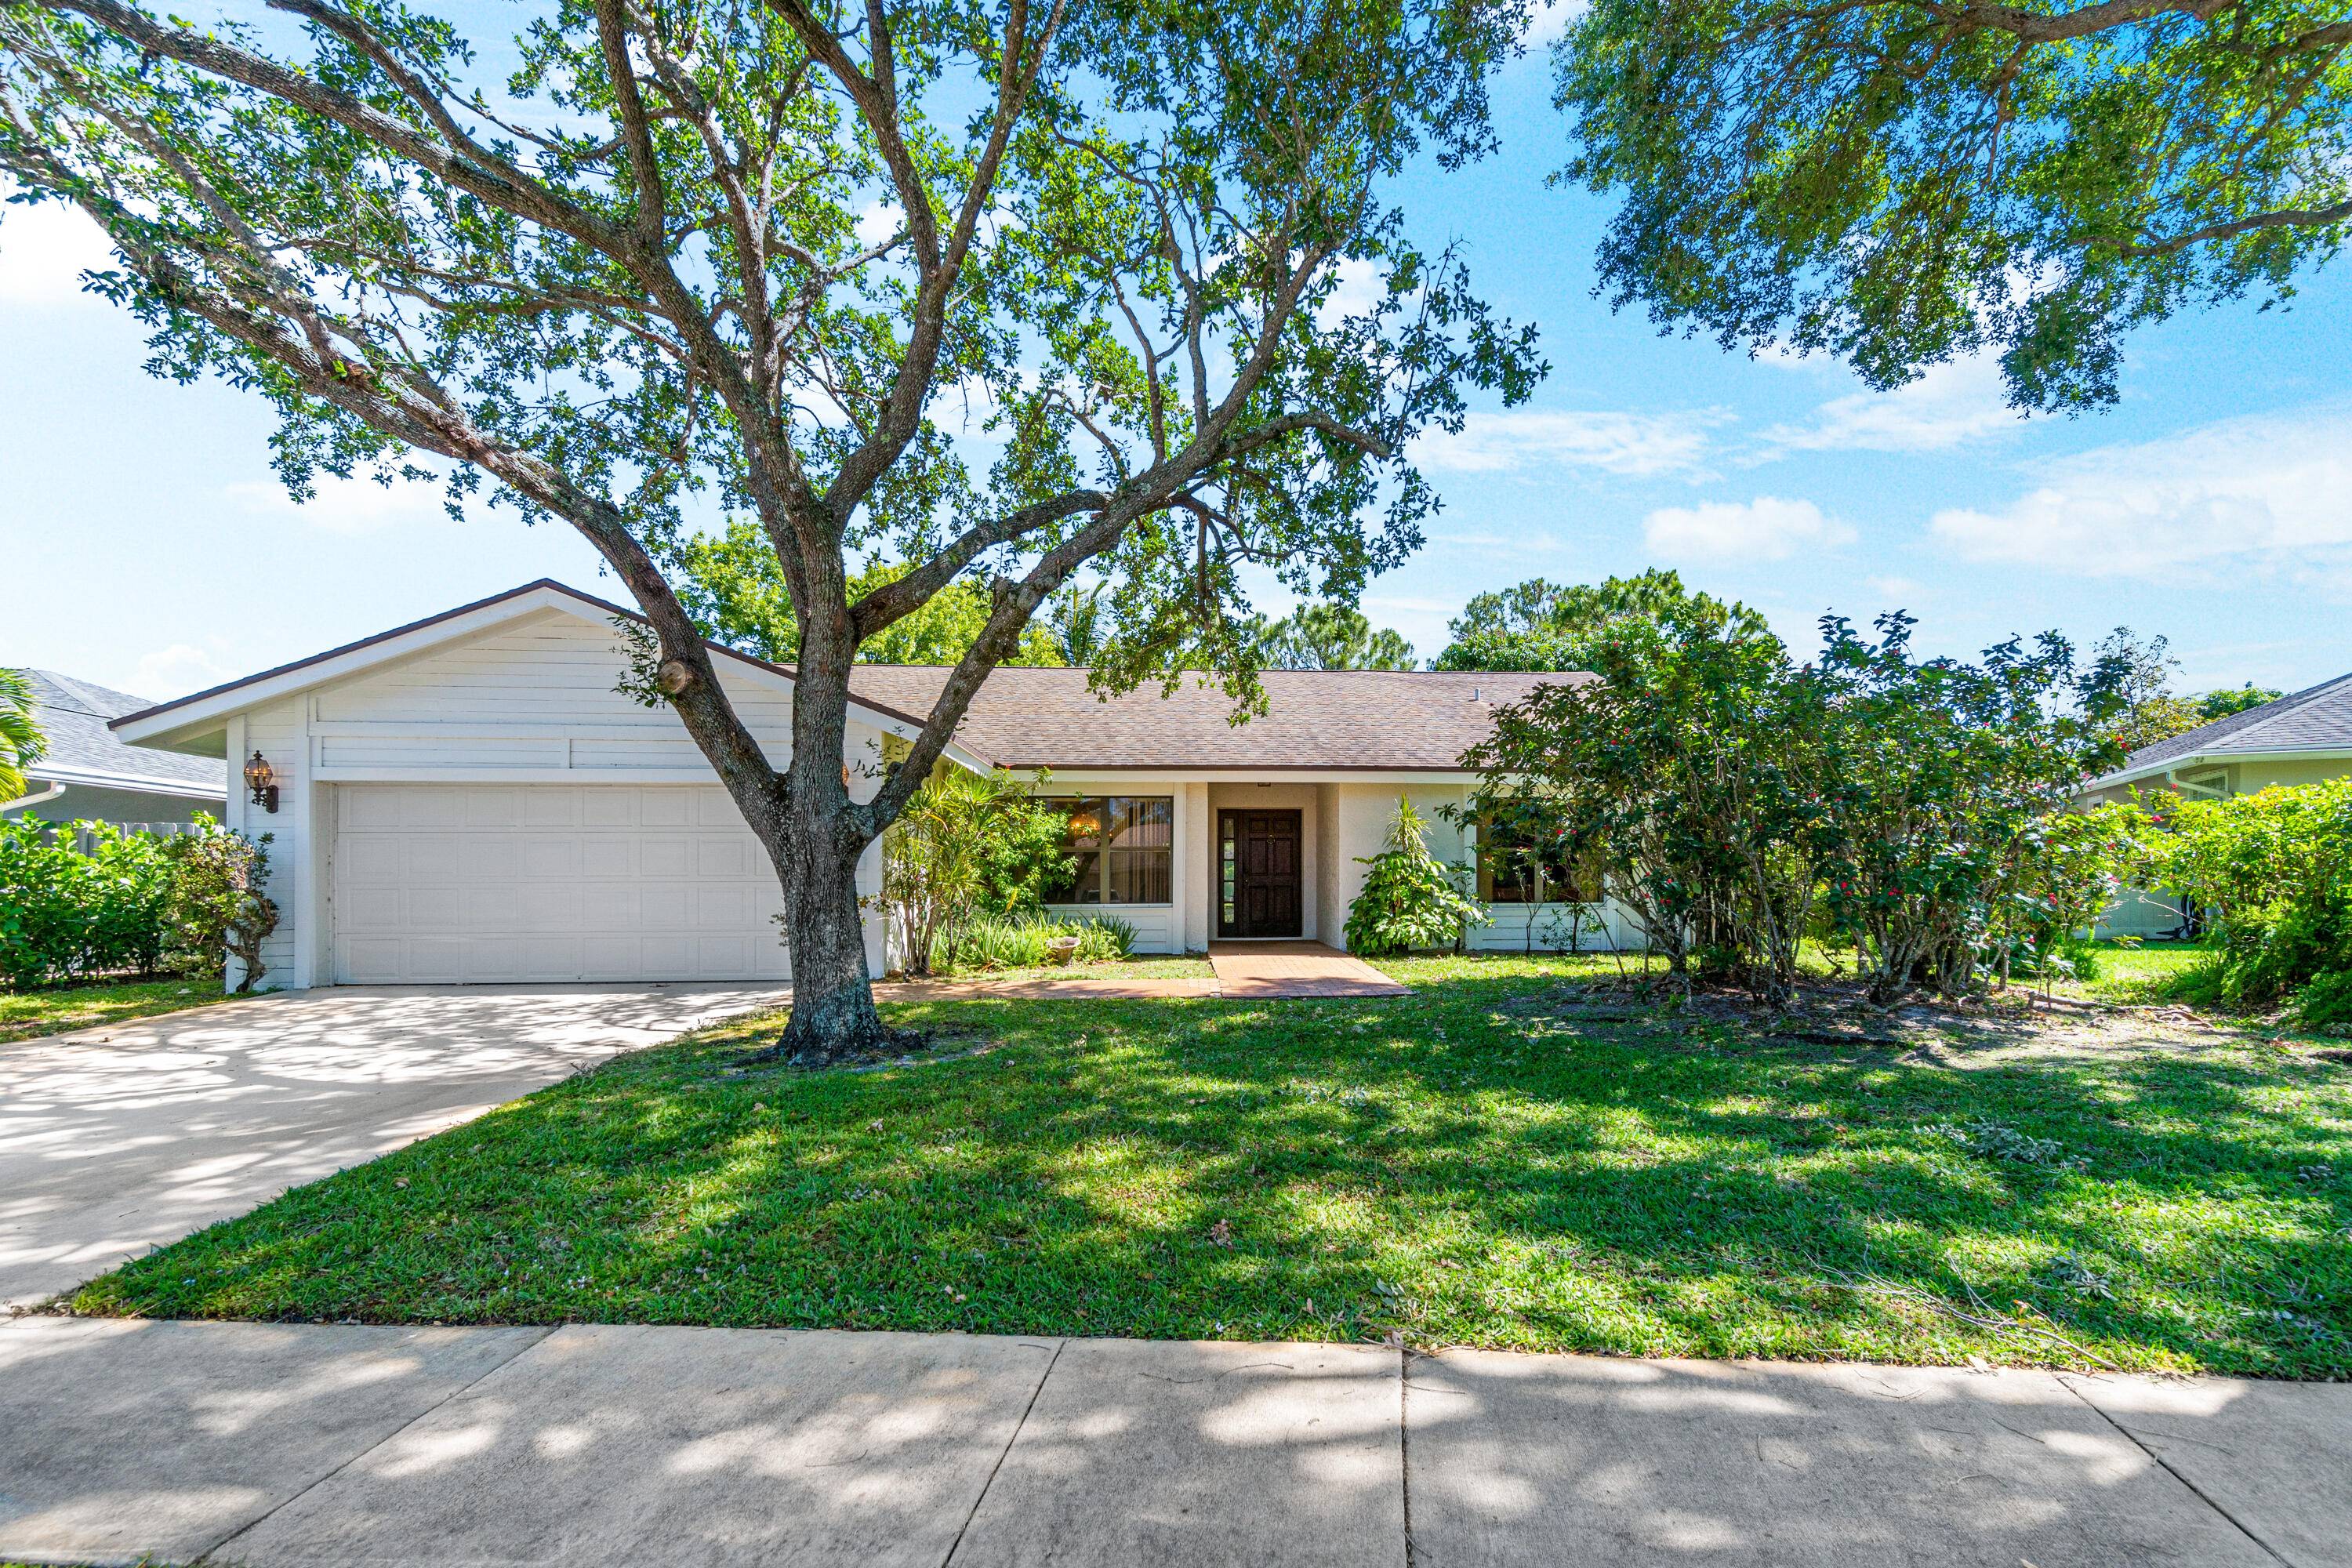 This spacious 2, 199 sq ft home offers a prime investment opportunity and or the chance for a buyer to customize the property to their specific needs.